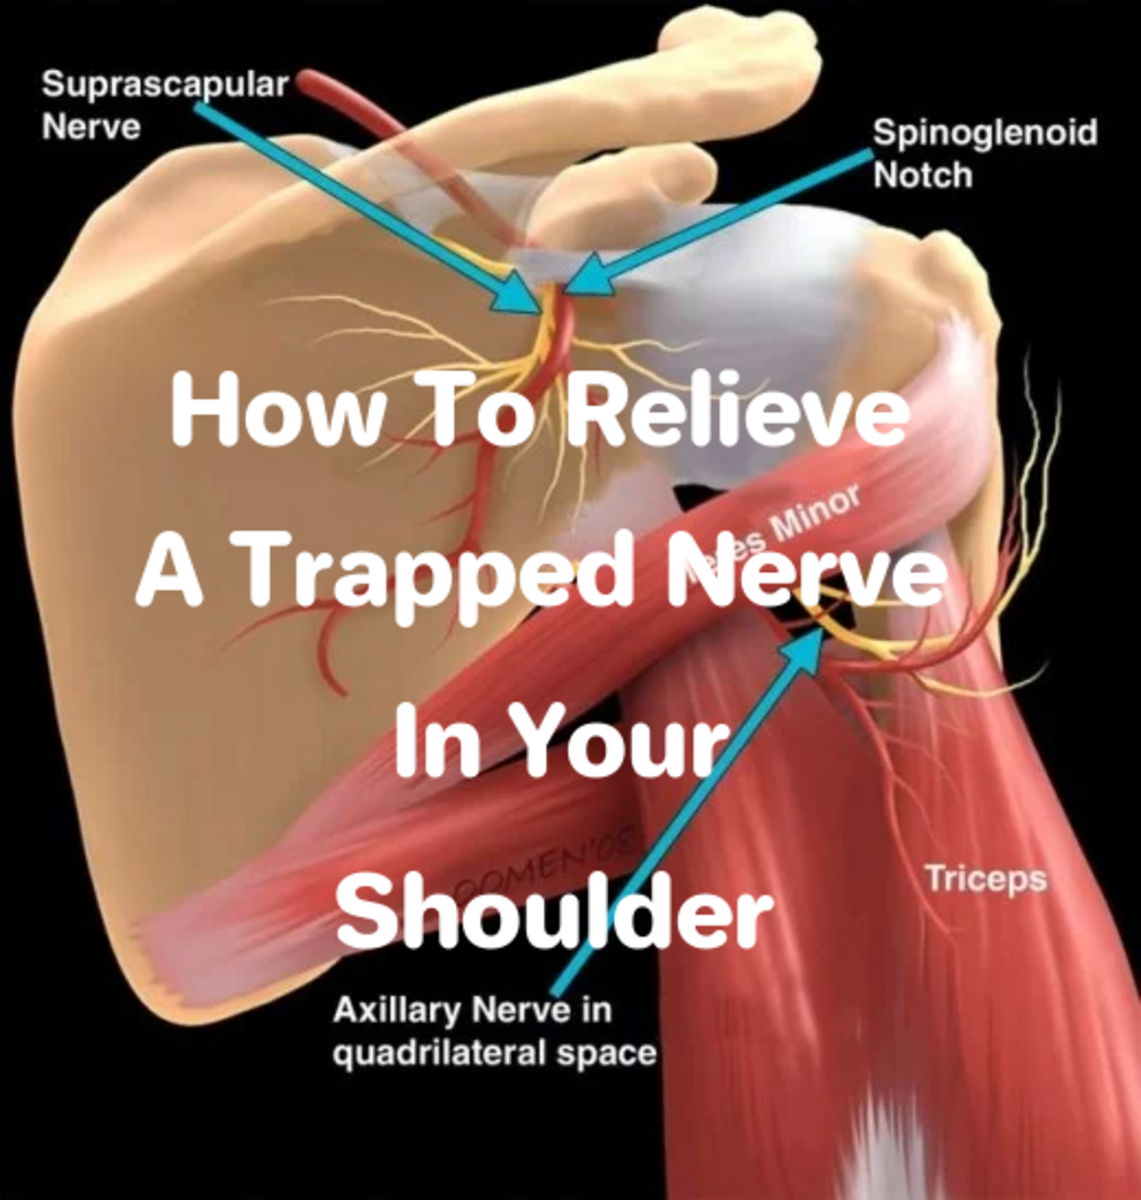 How to Relieve a Trapped Nerve in Your Shoulder